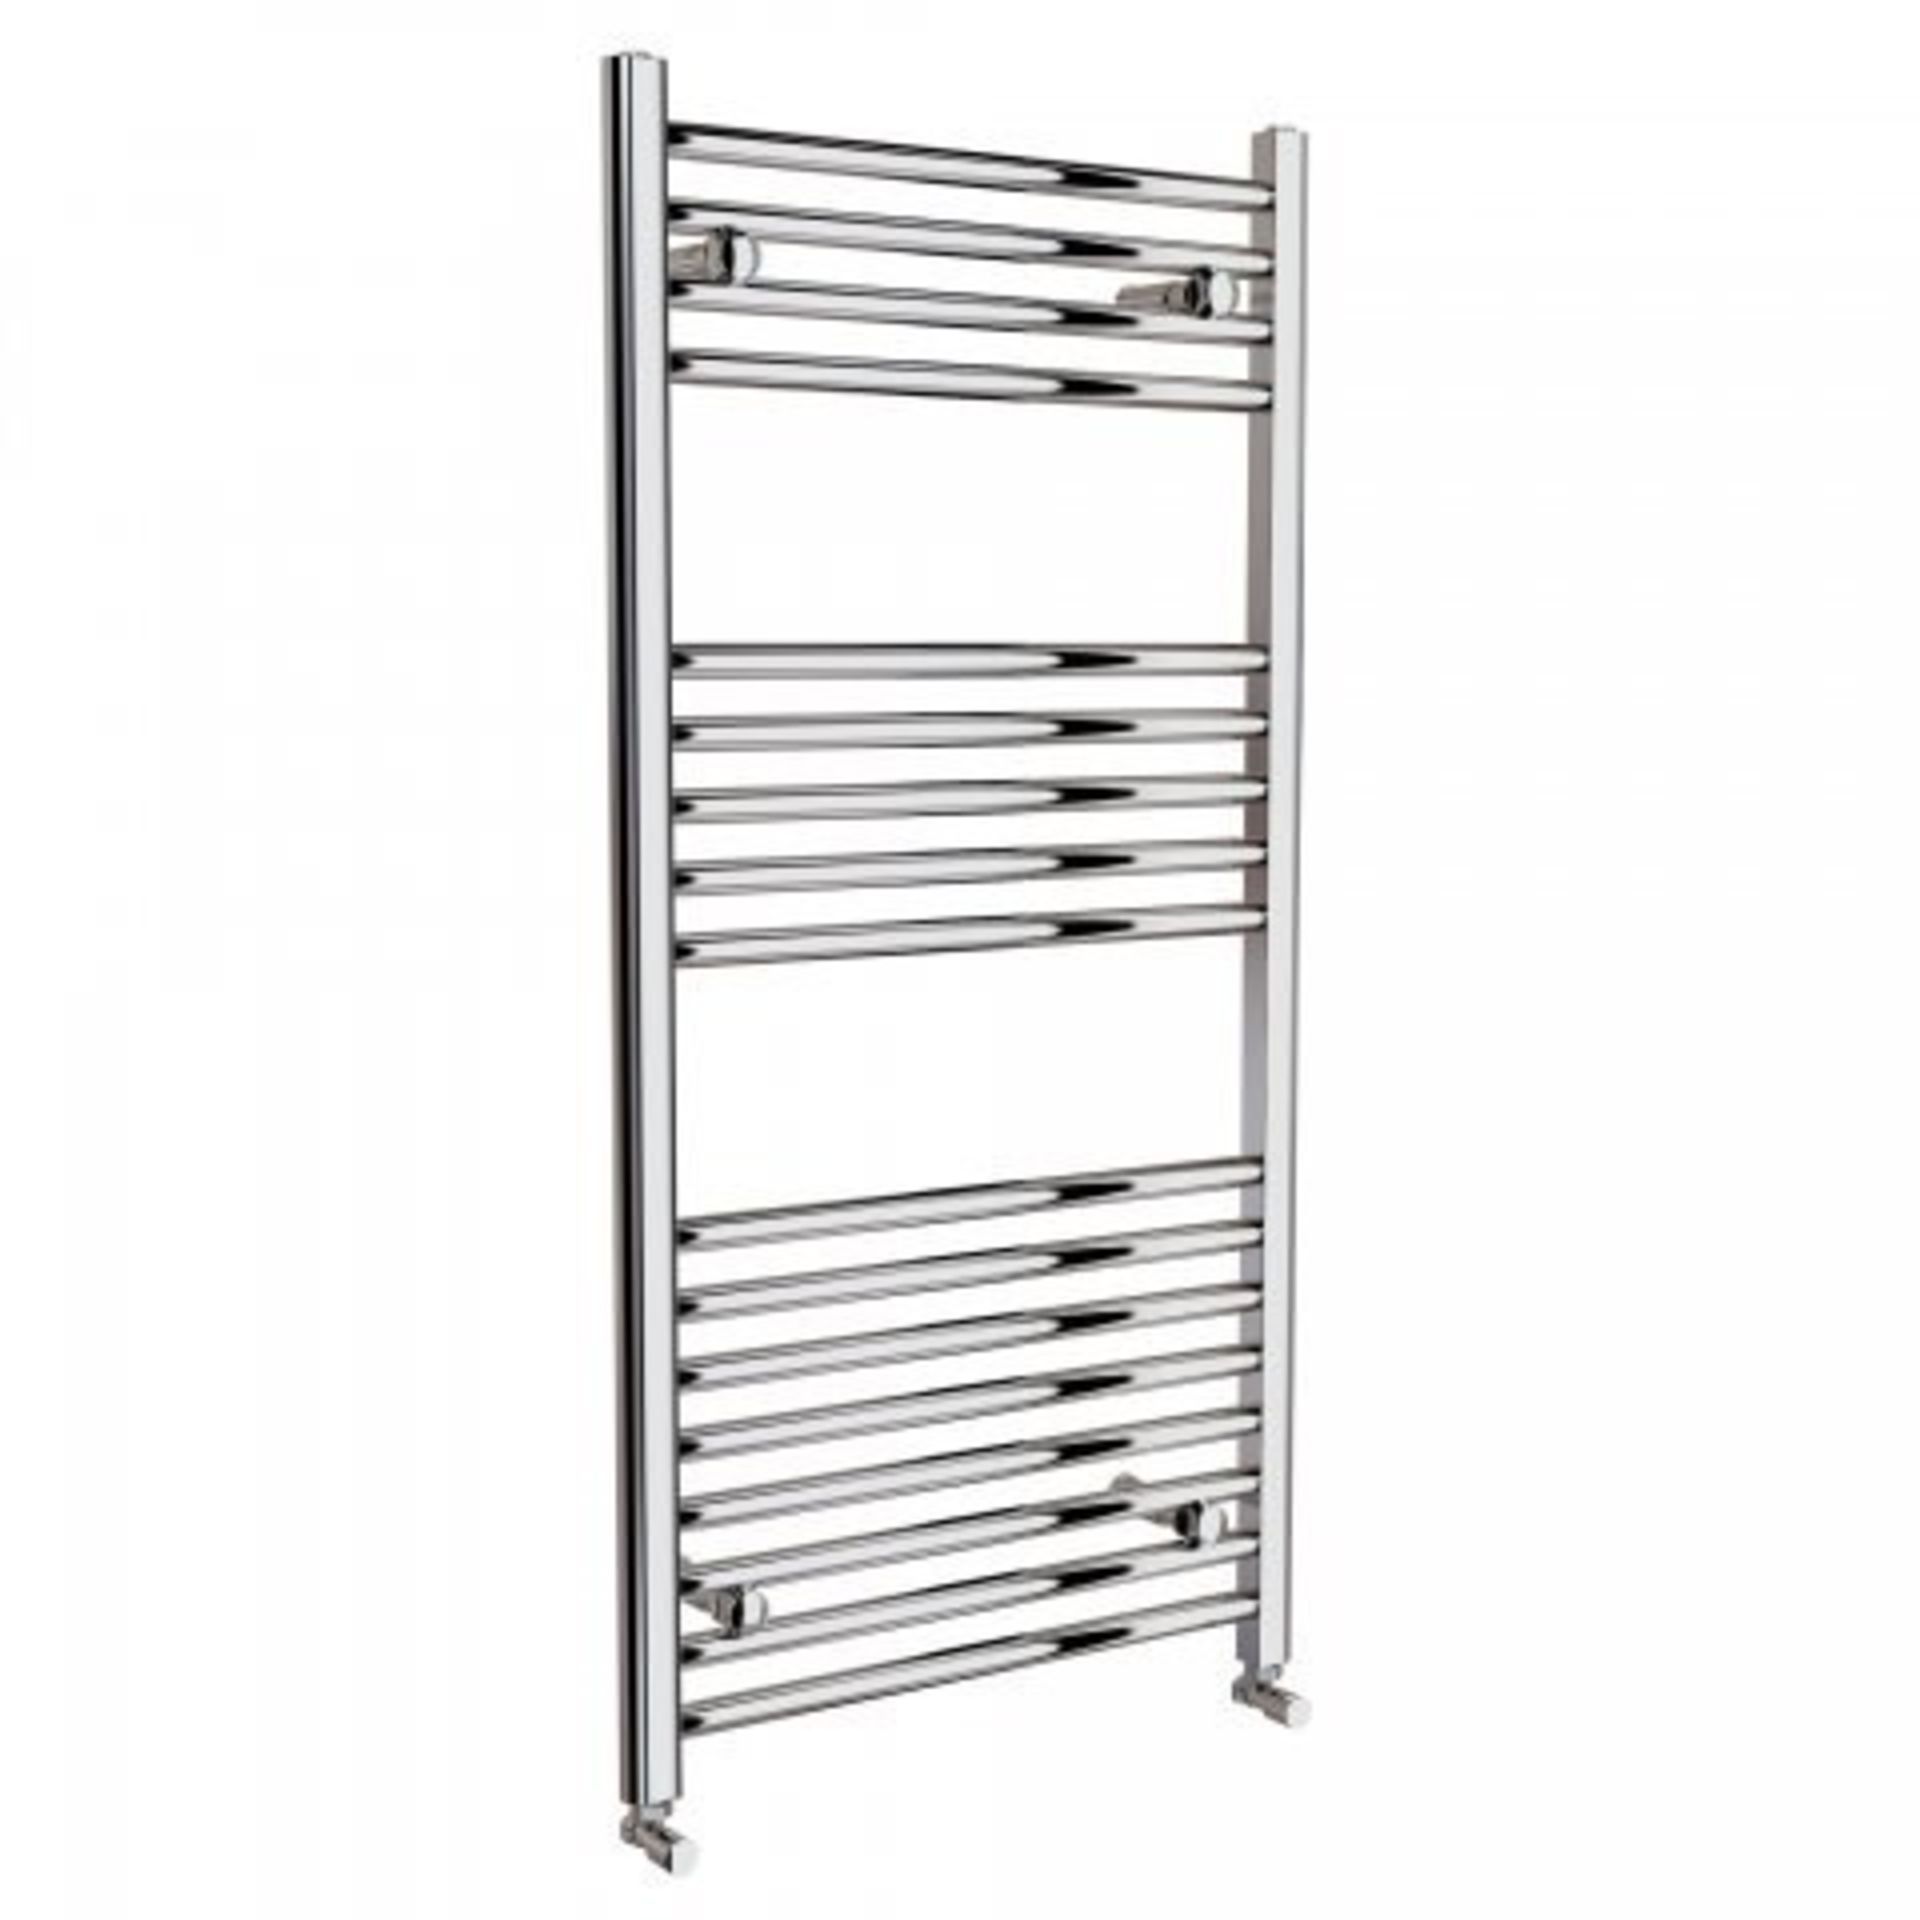 NEW & BOXED 1200x600mm - 20mm Tubes - Chrome Heated Straight Rail Ladder Towel Radiator.RRP £2... - Image 3 of 3